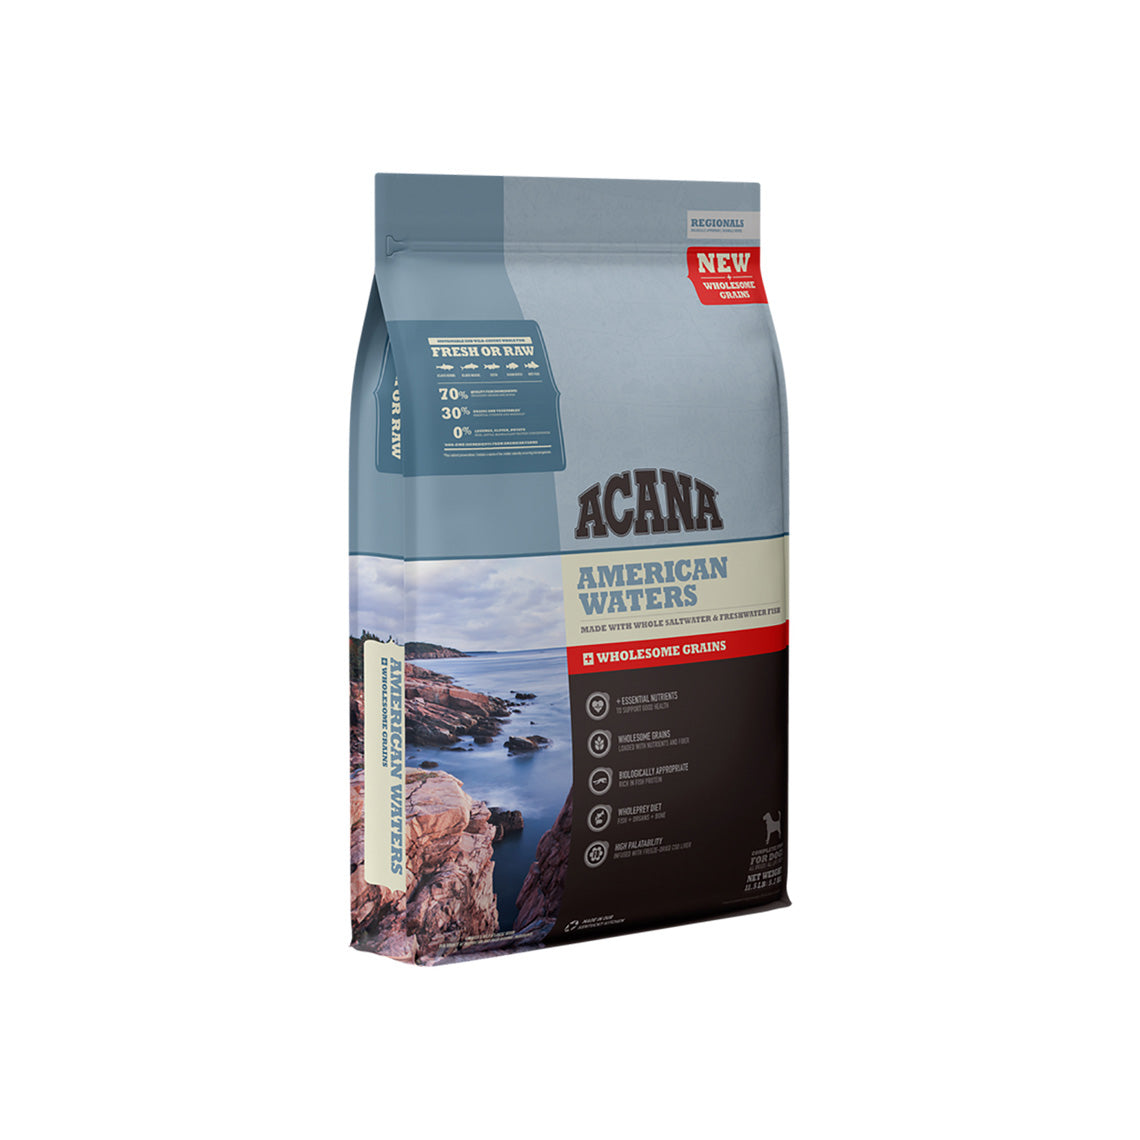 Acana Wholesome Grains Regionally Sourced Dry Food for Dogs